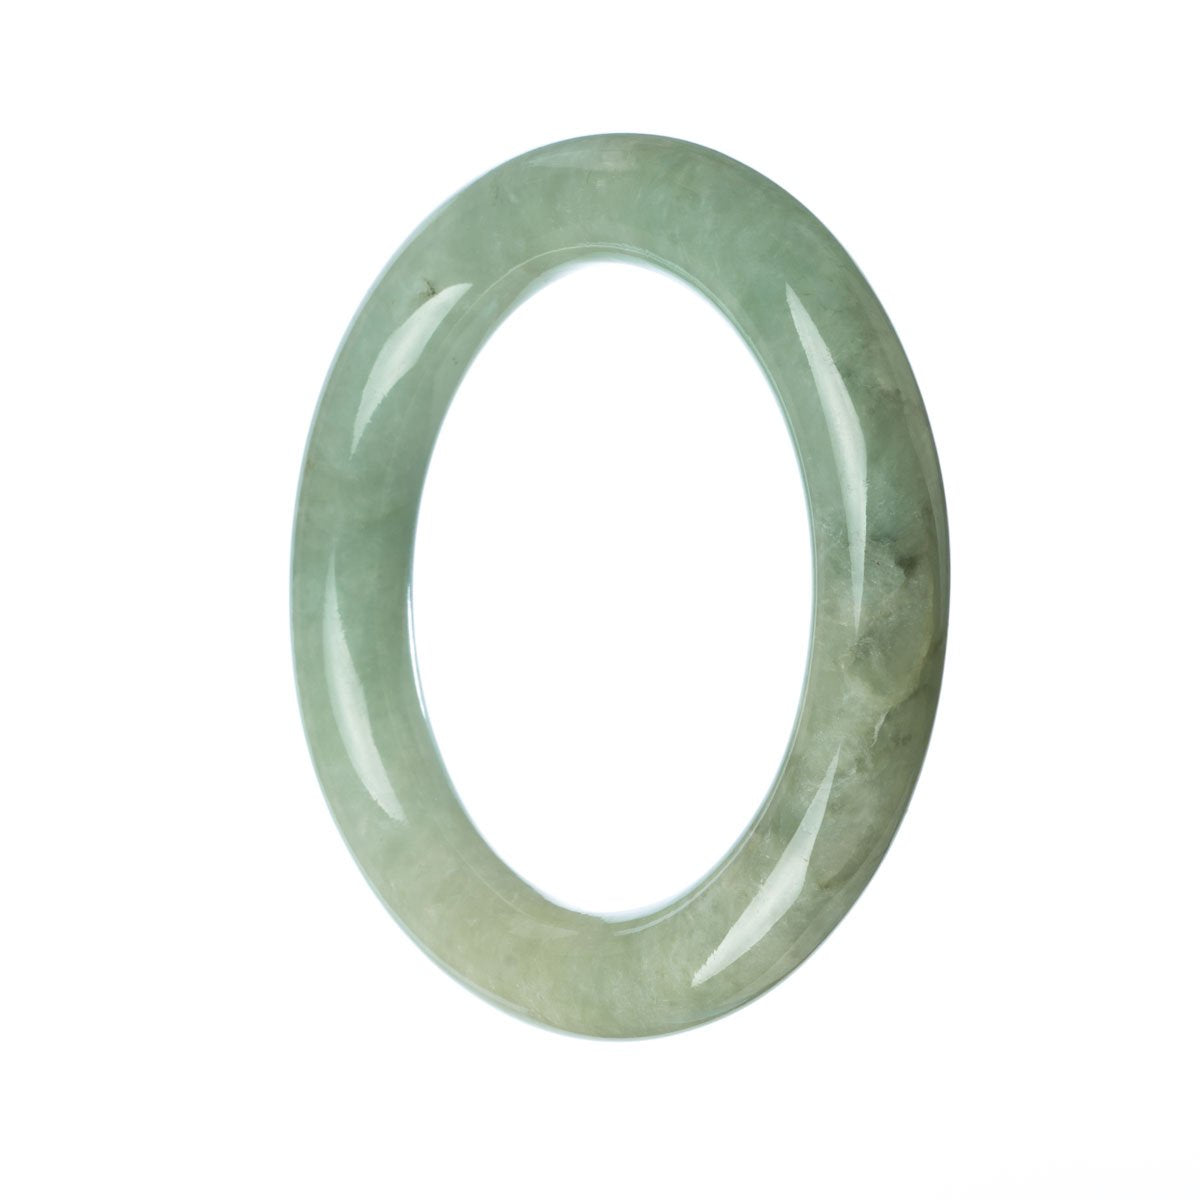 A round green jade bangle made from genuine Grade A jadeite, measuring 58mm in diameter.